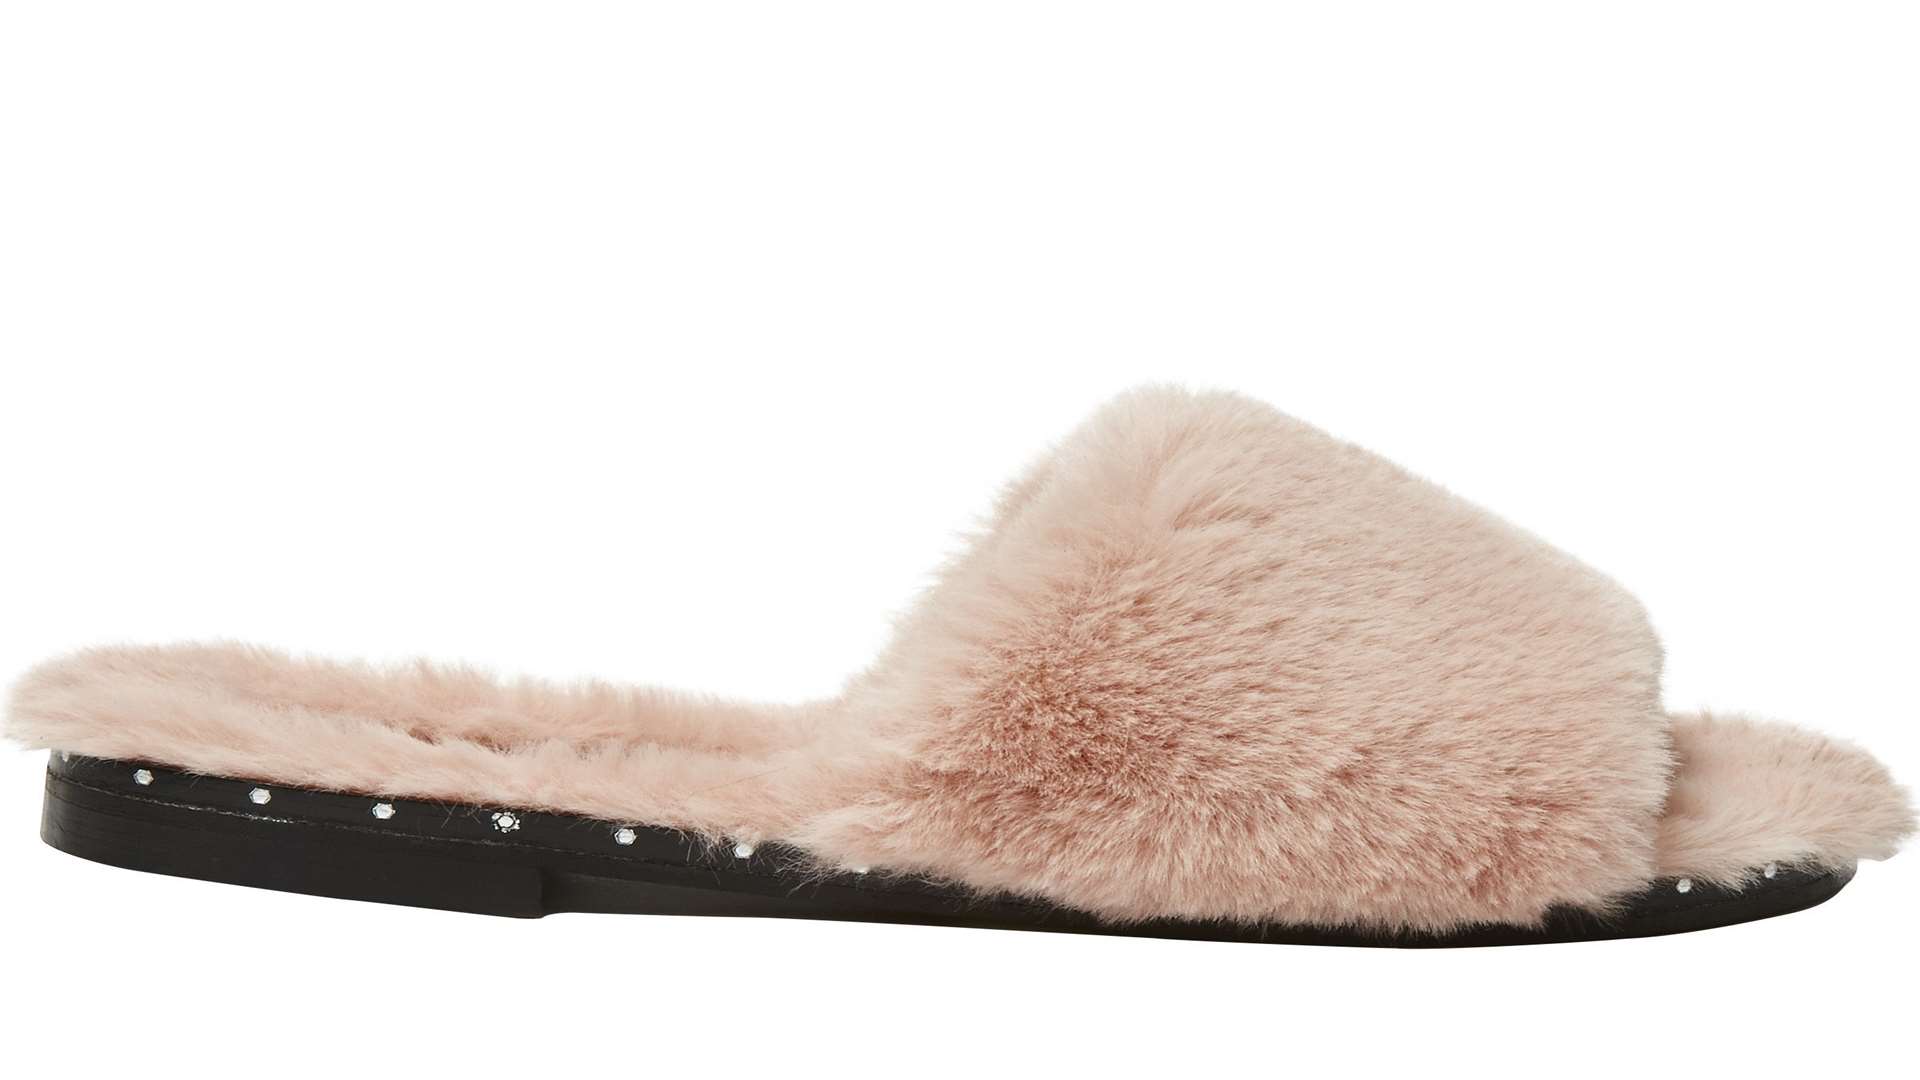 These snuggle fluffy pink faux fur mule sandals from Office are £48. Team with your with faded 1990s denim or sport luxe separates.